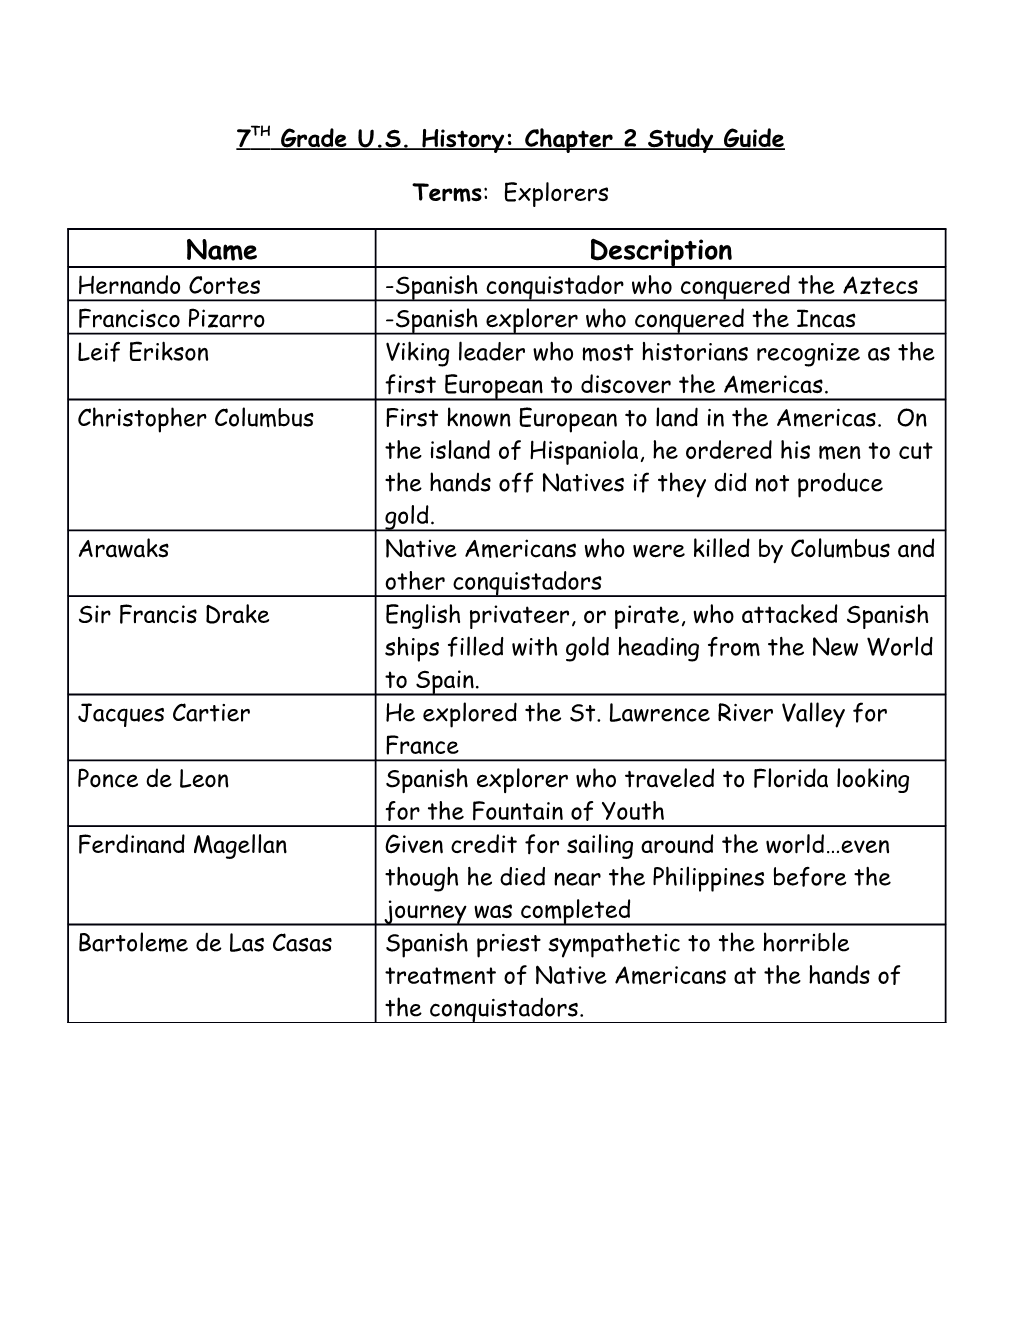 7TH Grade U.S. History: Chapter 2 Study Guide